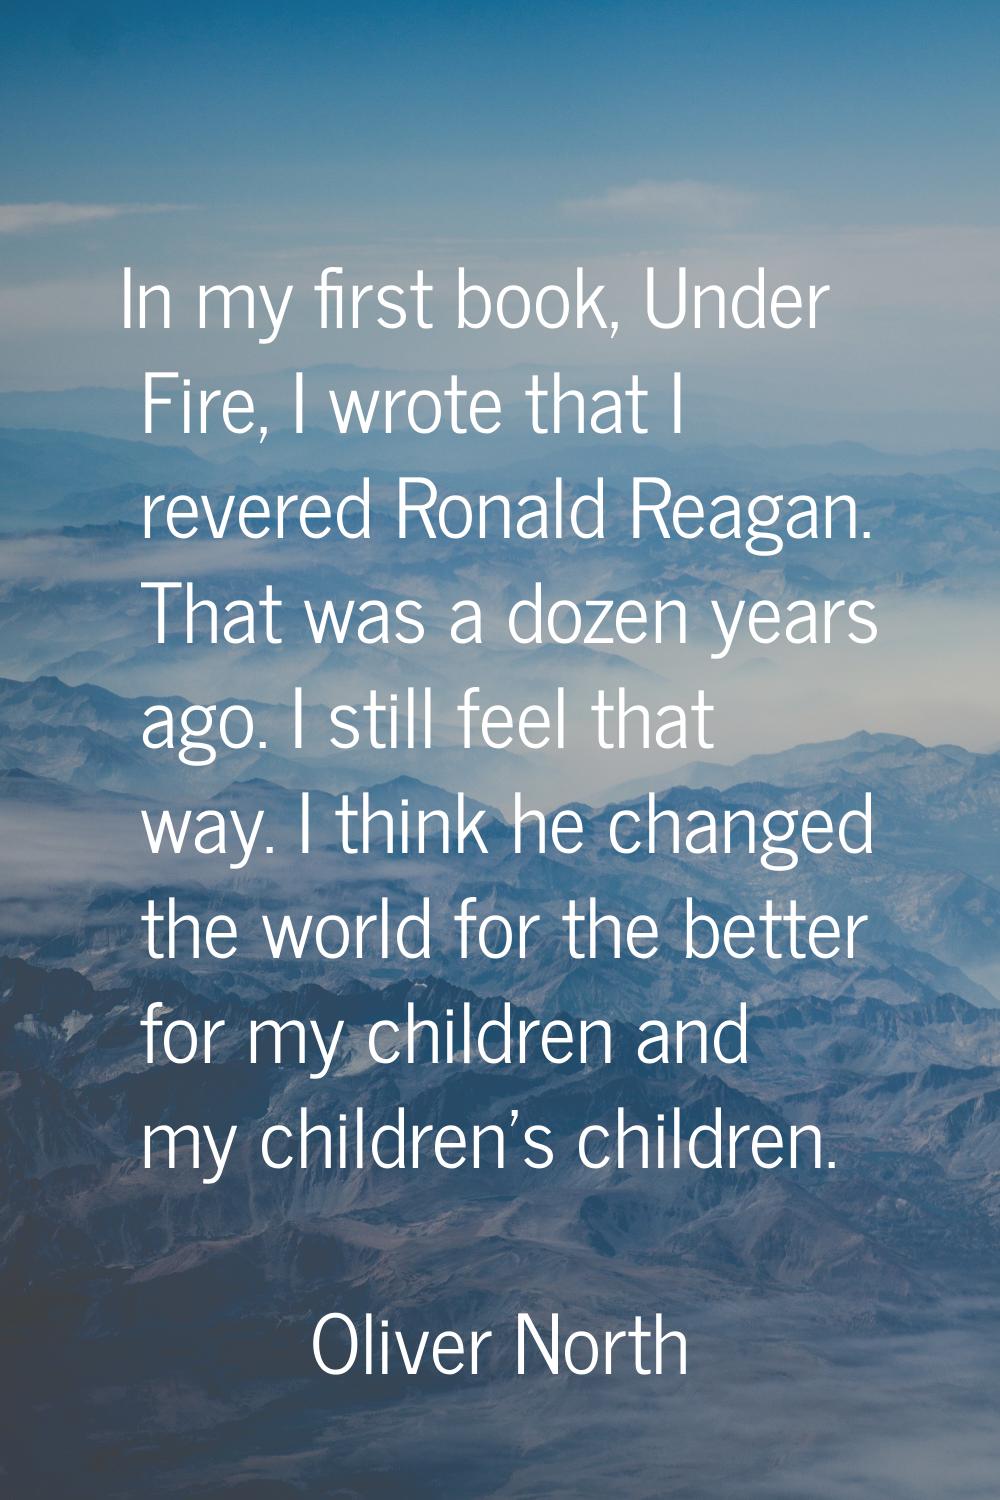 In my first book, Under Fire, I wrote that I revered Ronald Reagan. That was a dozen years ago. I s